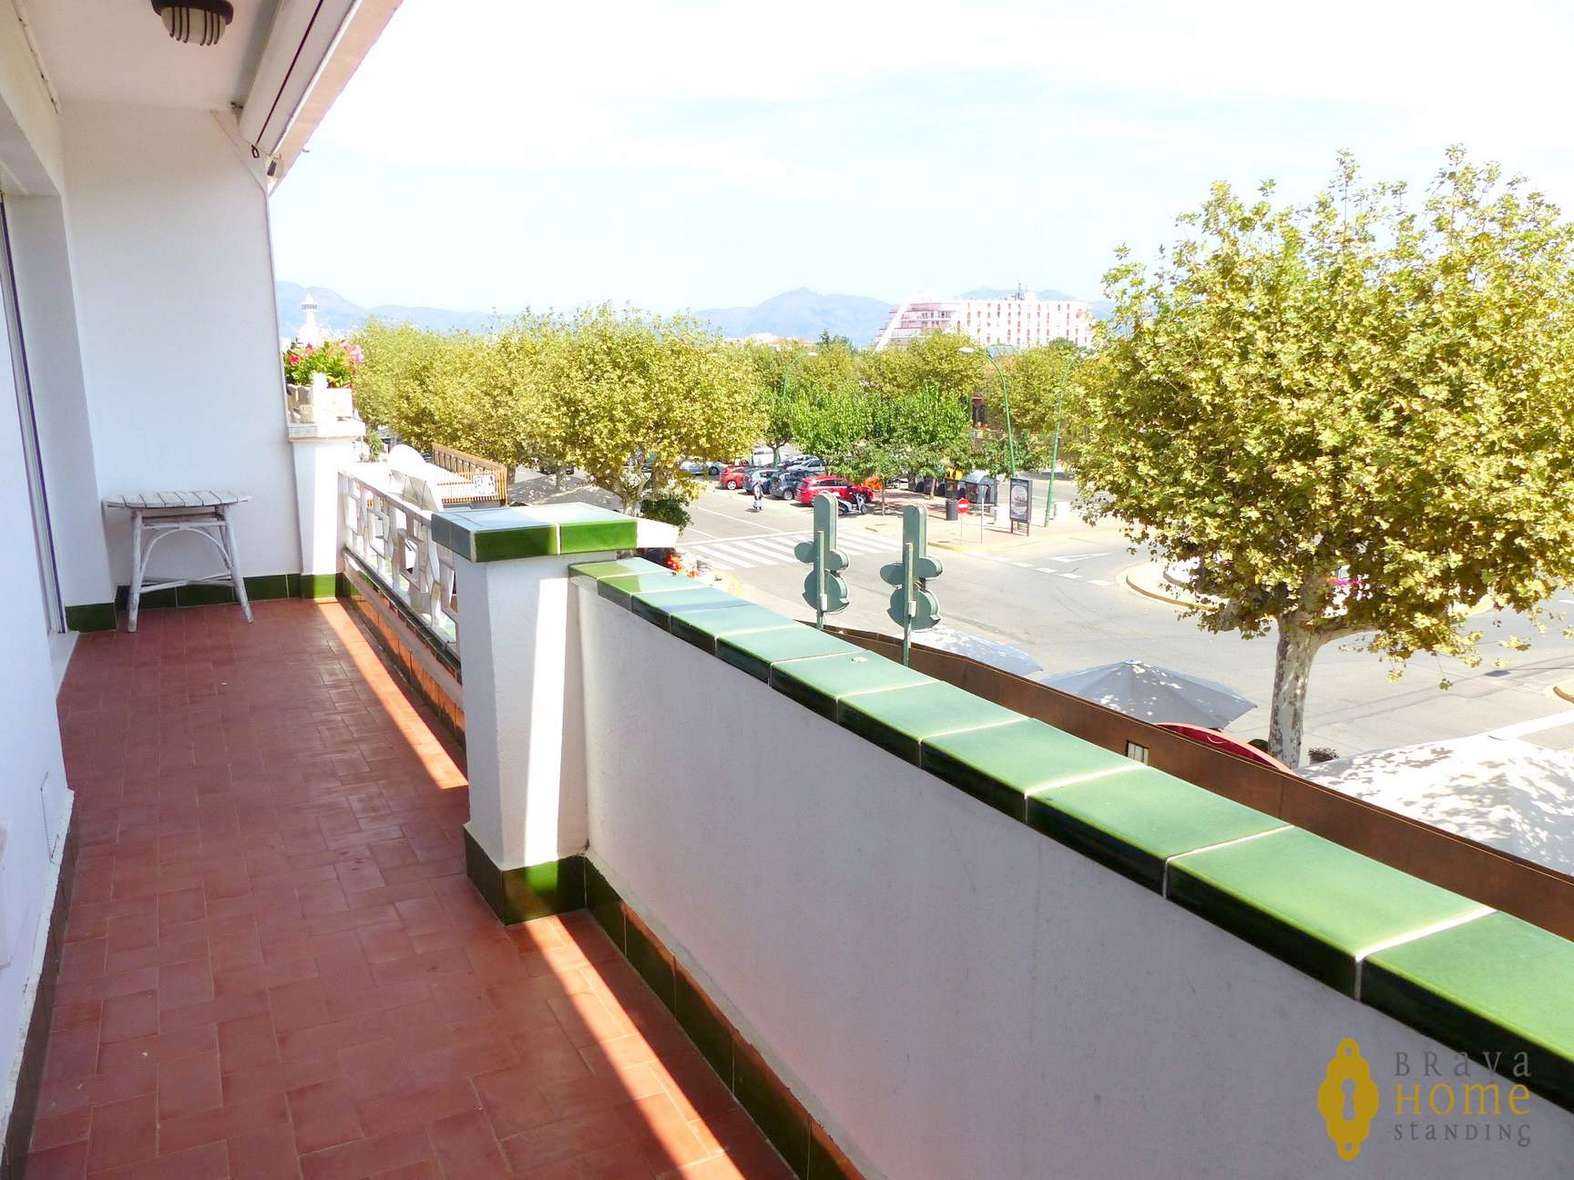 Apartment in the center of Empuriabrava, for sale